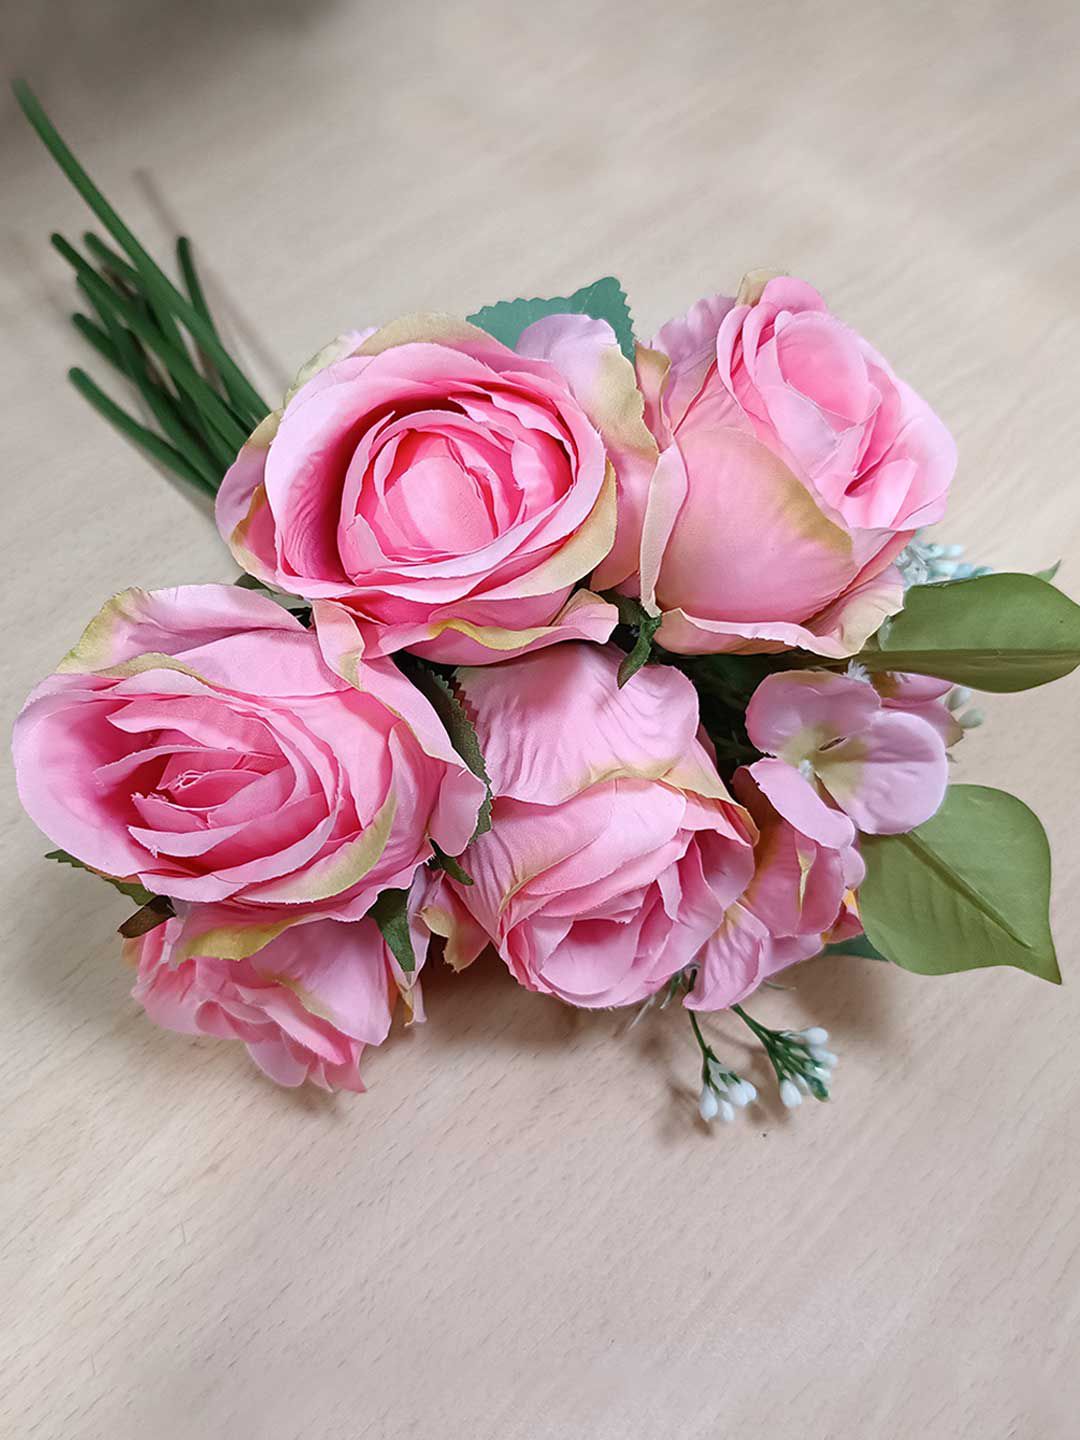 Art Street Set Of 9 Pink Rose Artificial Flower Bunch Price in India